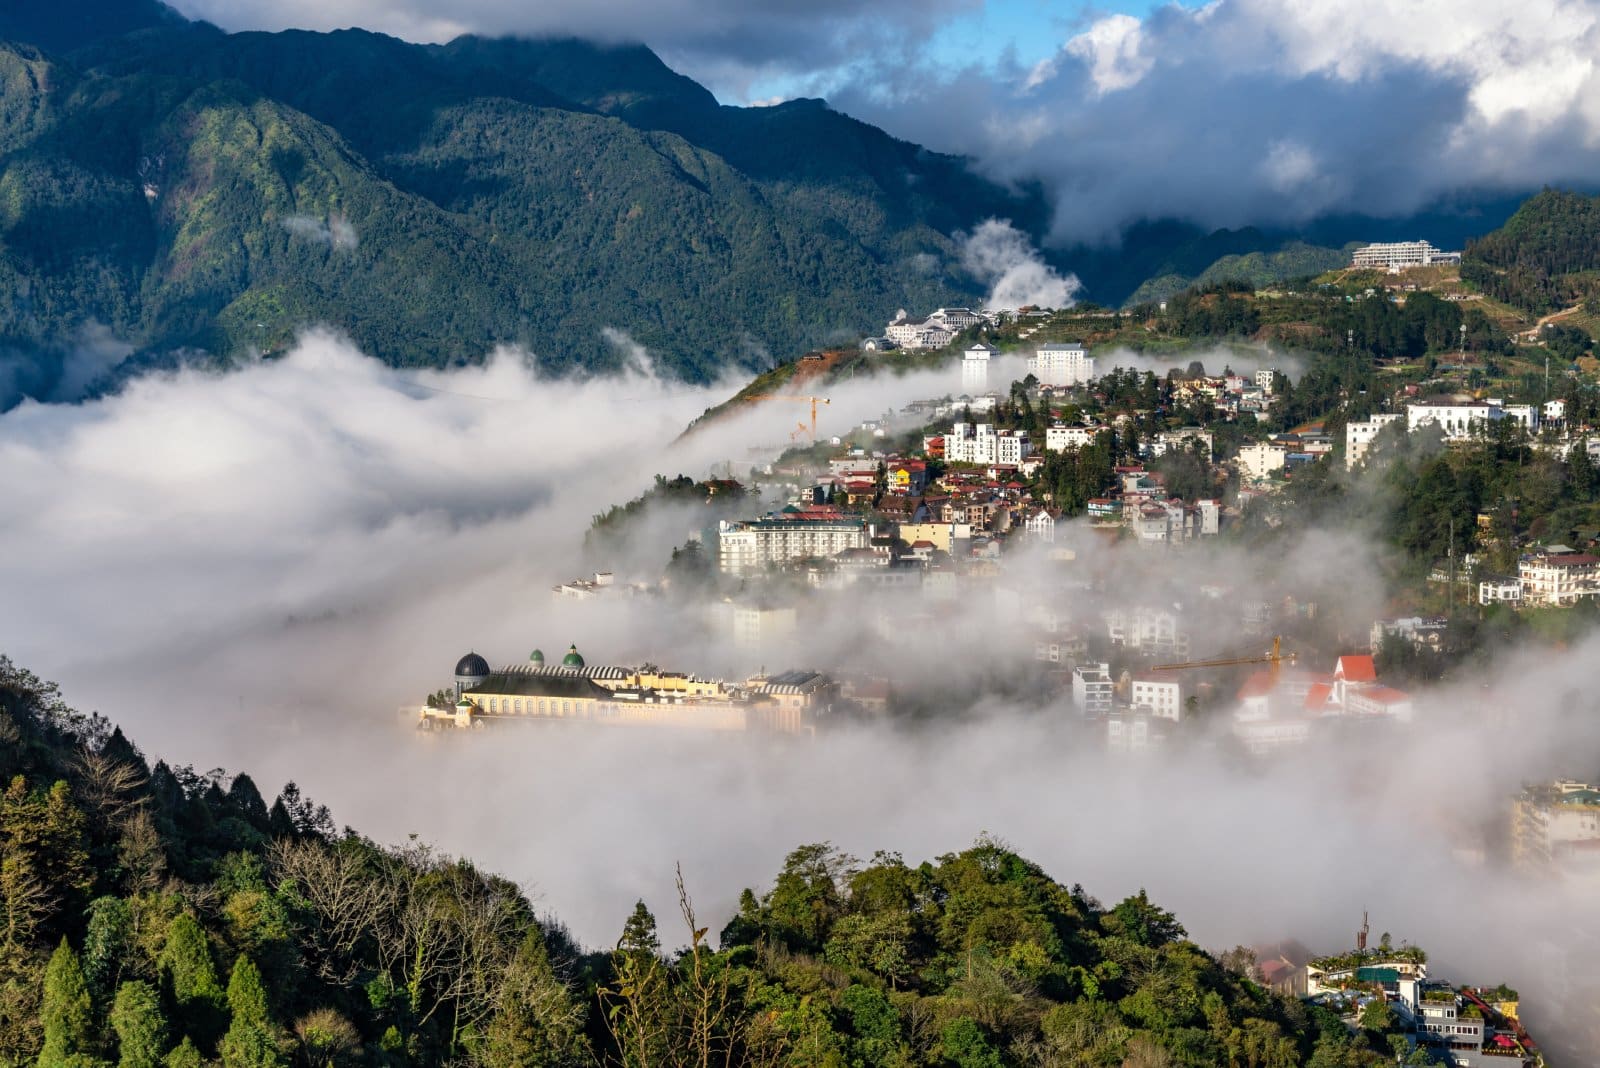 <p class="wp-caption-text">Image Credit: Shutterstock / Dzung Vu</p>  <p><span>Sapa, located in the northern mountains of Vietnam, is known for its breathtaking landscapes, ethnic minority villages, and terraced rice fields. While not directly related to the Vietnam War, trekking tours in Sapa led by veterans offer an exploration of Vietnam’s diverse cultures and the challenges of mountain warfare. The veterans share insights into these regions’ strategic importance and local communities’ resilience. Trekking routes vary from moderate walks to more strenuous hikes, all offering panoramic views and cultural encounters.</span></p>